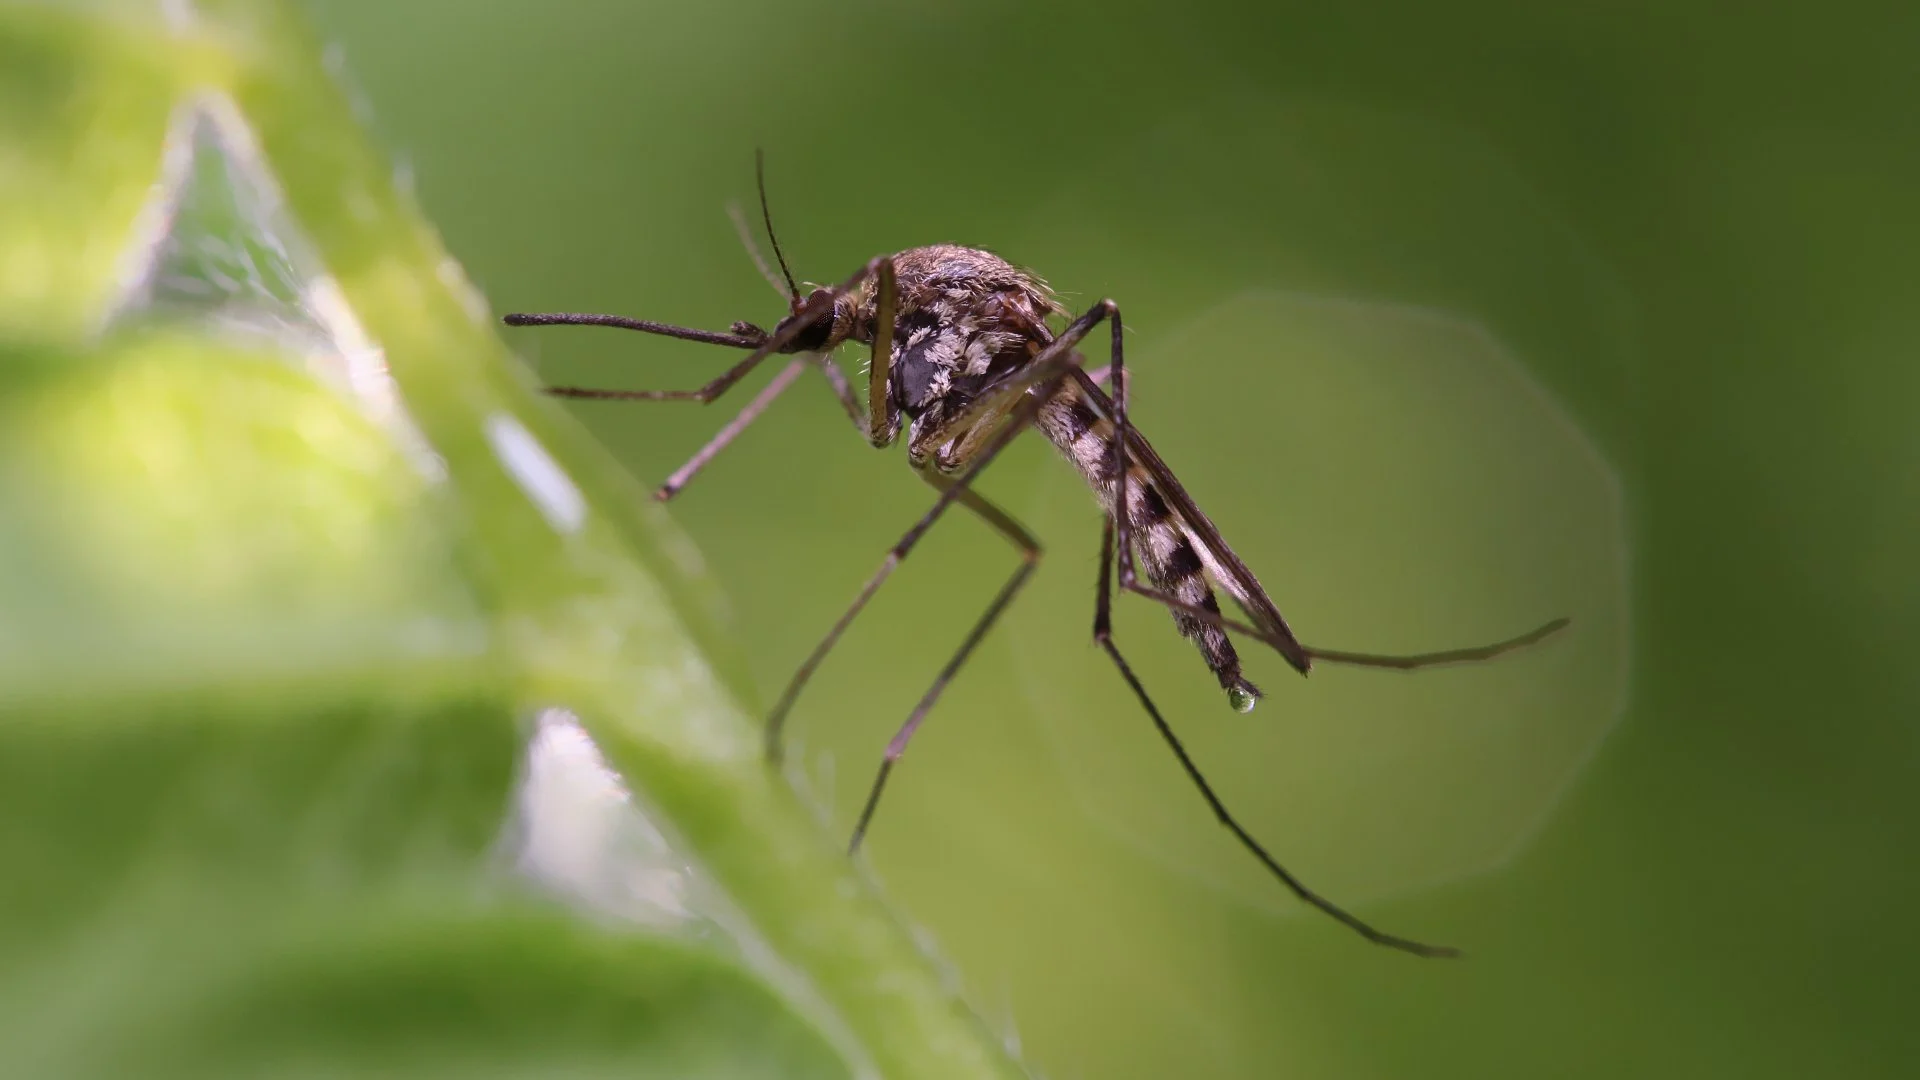 Are Mosquitoes Sending You Inside? Control Mosquitoes With These 3 Tips